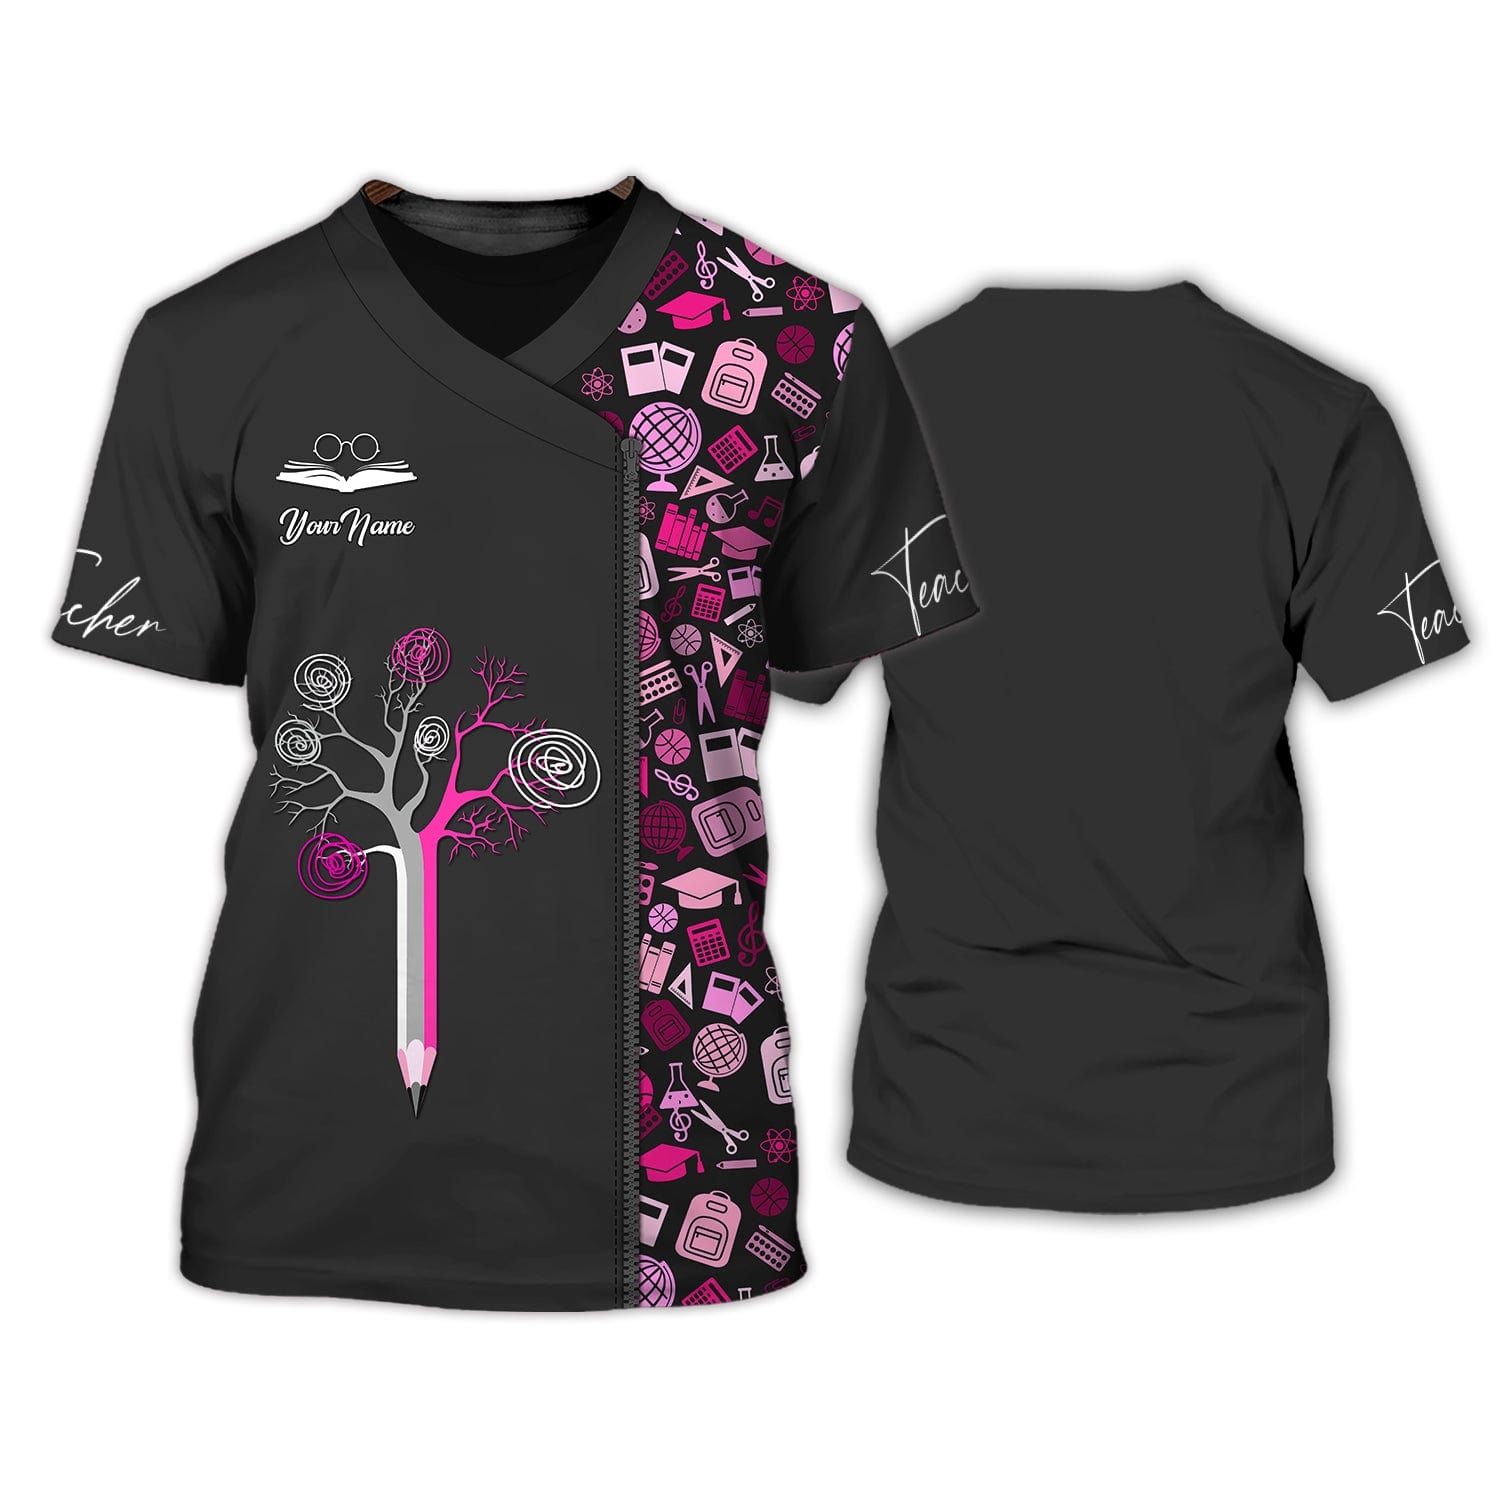 Personalized Teacher All Over Print Shirt -  Black And Pink Color, Wisdom's Tree On A Vivid Backdrop